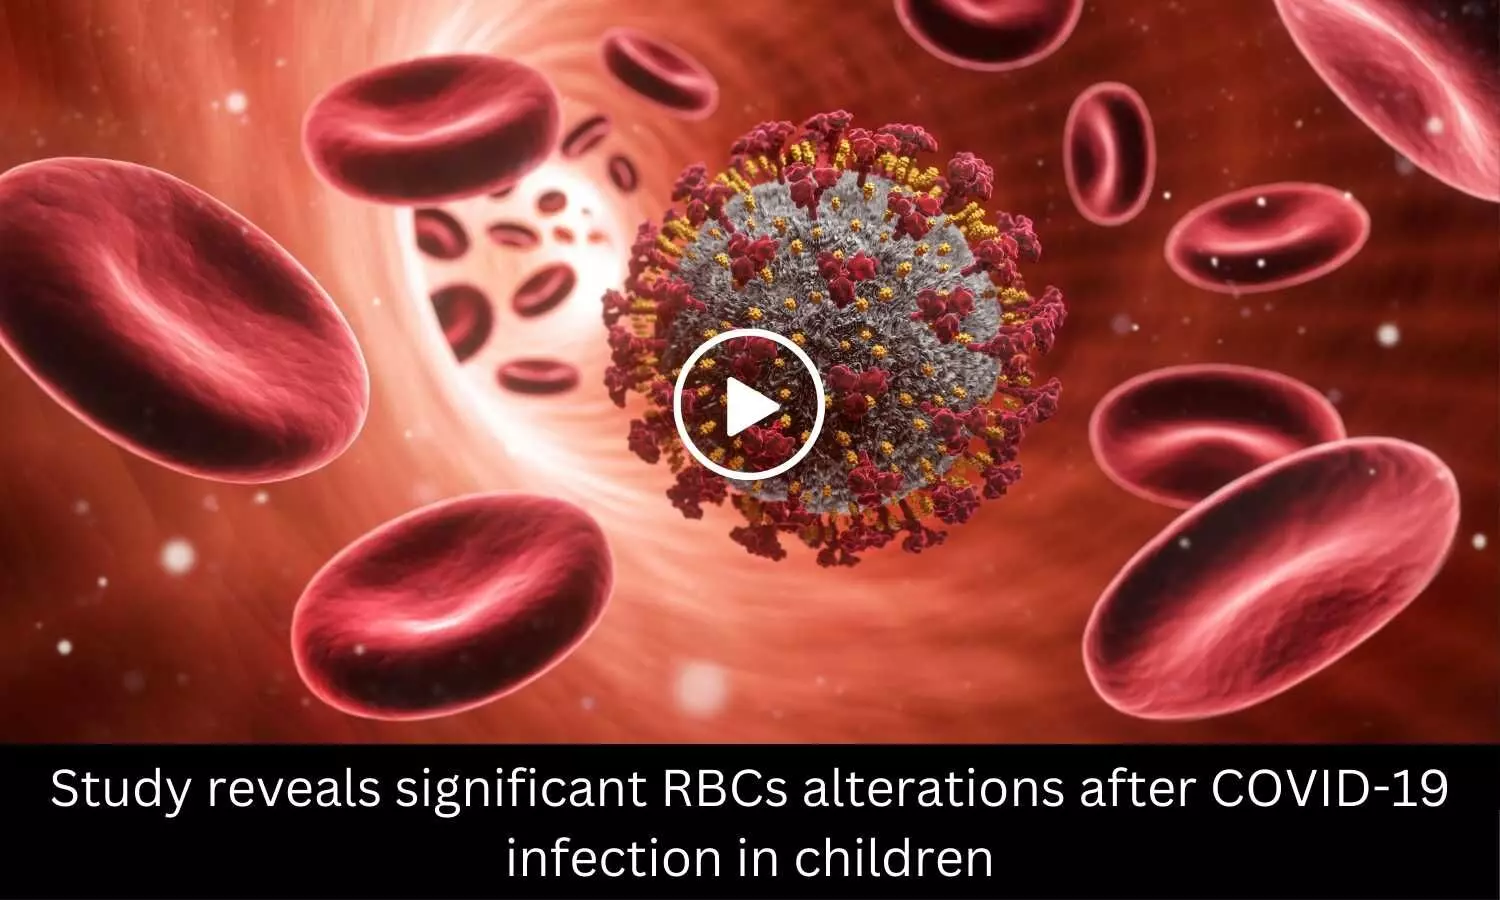 Study reveals significant RBCs alterations after COVID-19 infection in children